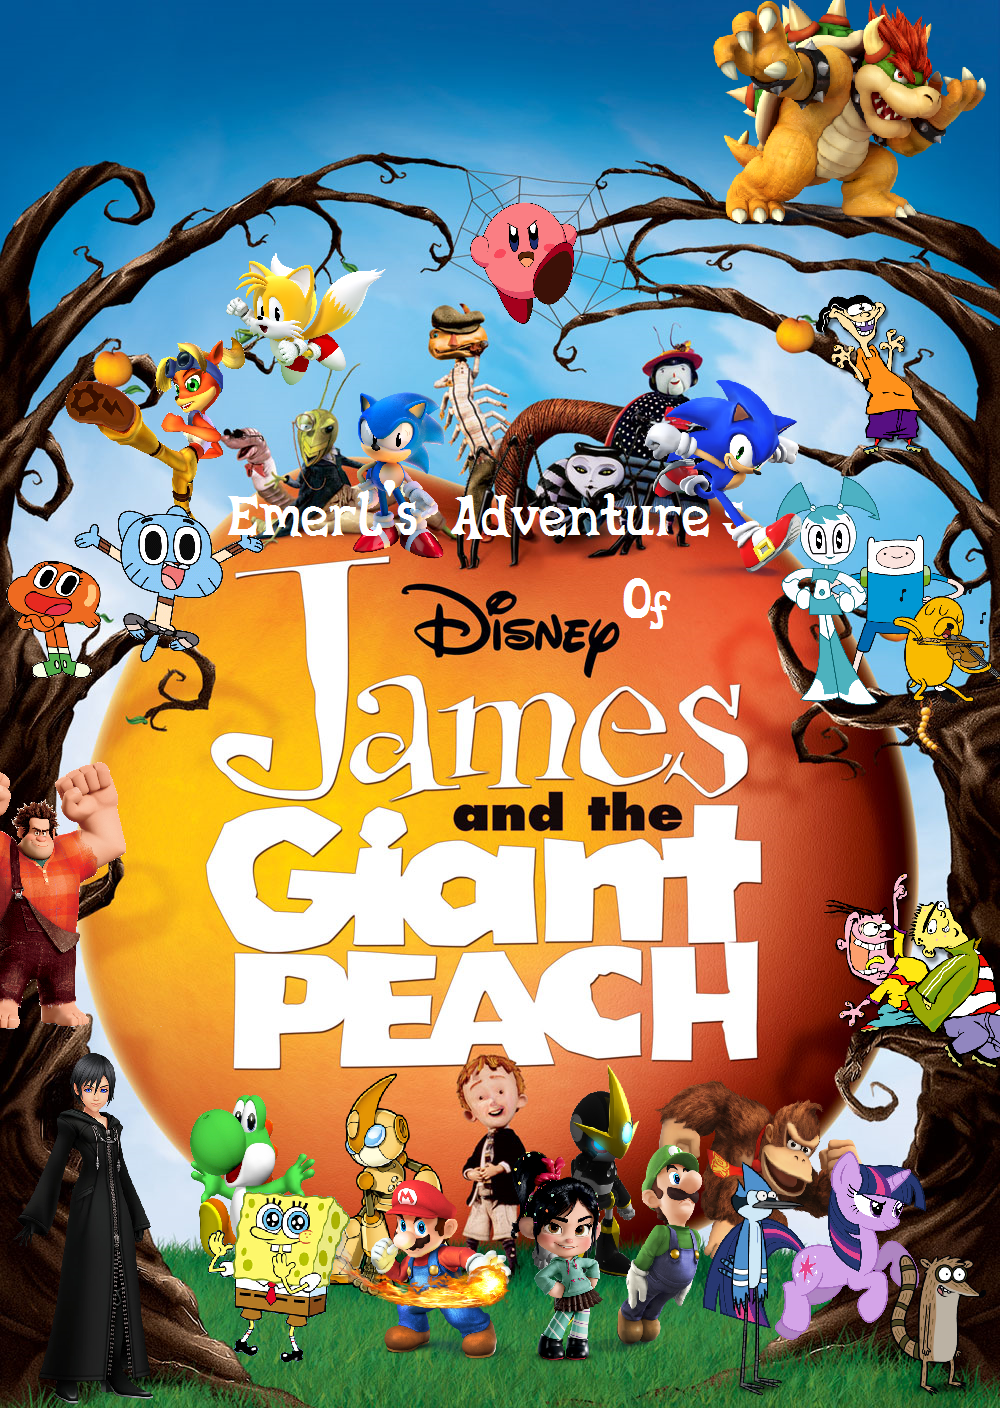 Emerl's Adventure's Of James & The Giant Peach | Pooh's Adventures Wiki